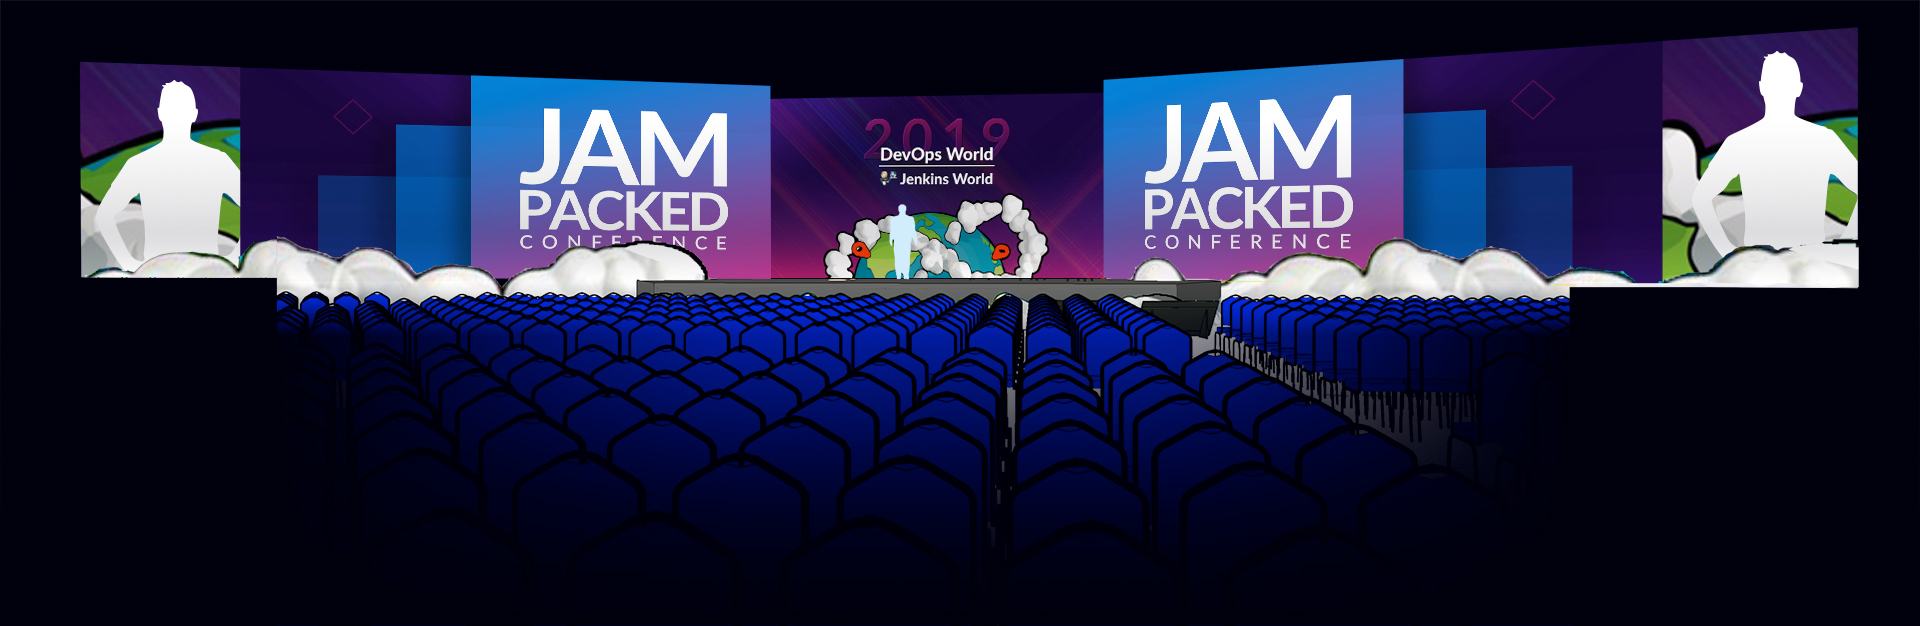 A stage mockup of the three screen set up from 2019 DevOps World Jenkins World event. It set the tone with giant text that says "Jam Packed Conference".